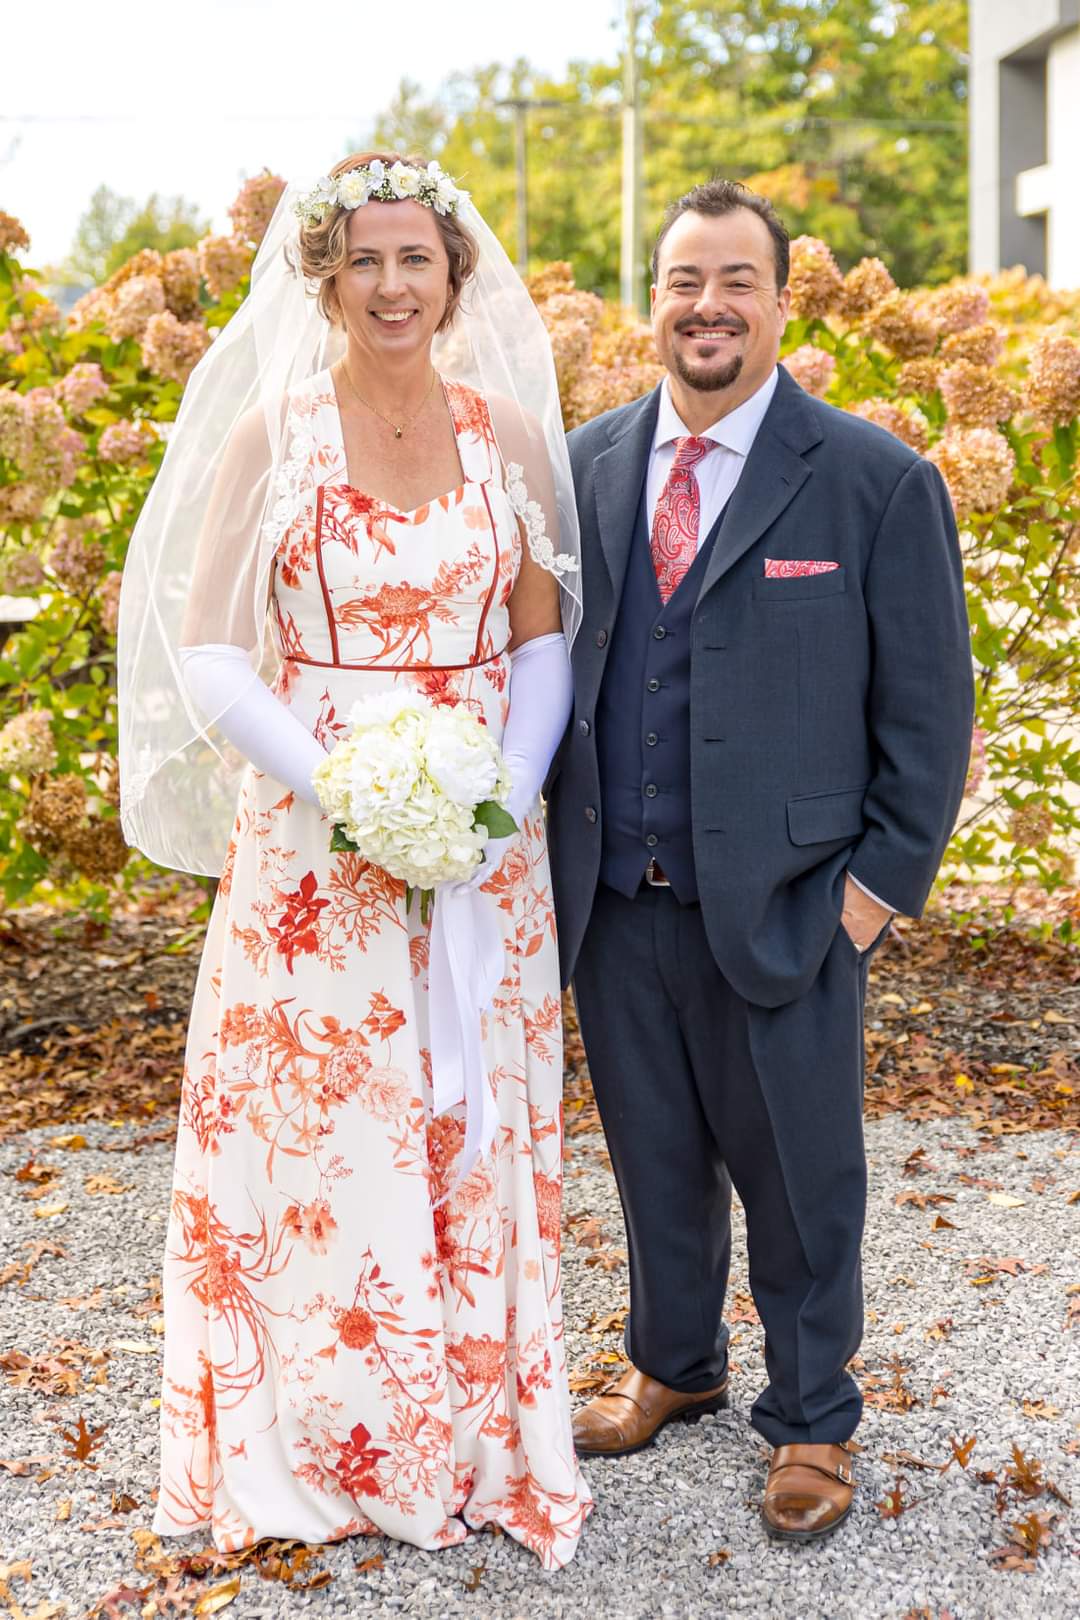 Very happy Christian couple pose proudly on their wedding day in front of autumn colours